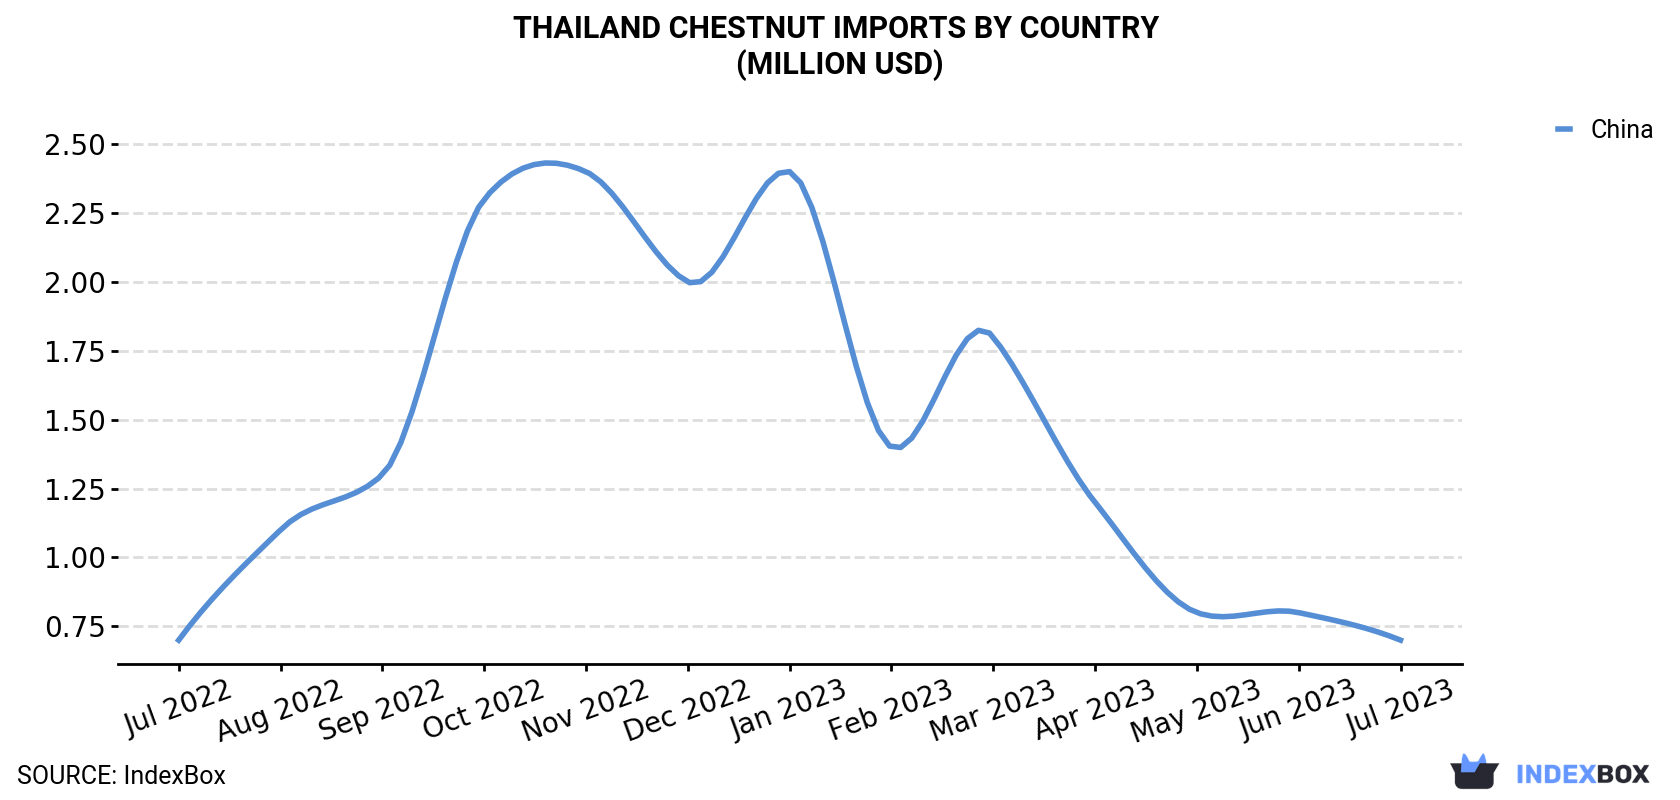 Thailand Chestnut Imports By Country (Million USD)